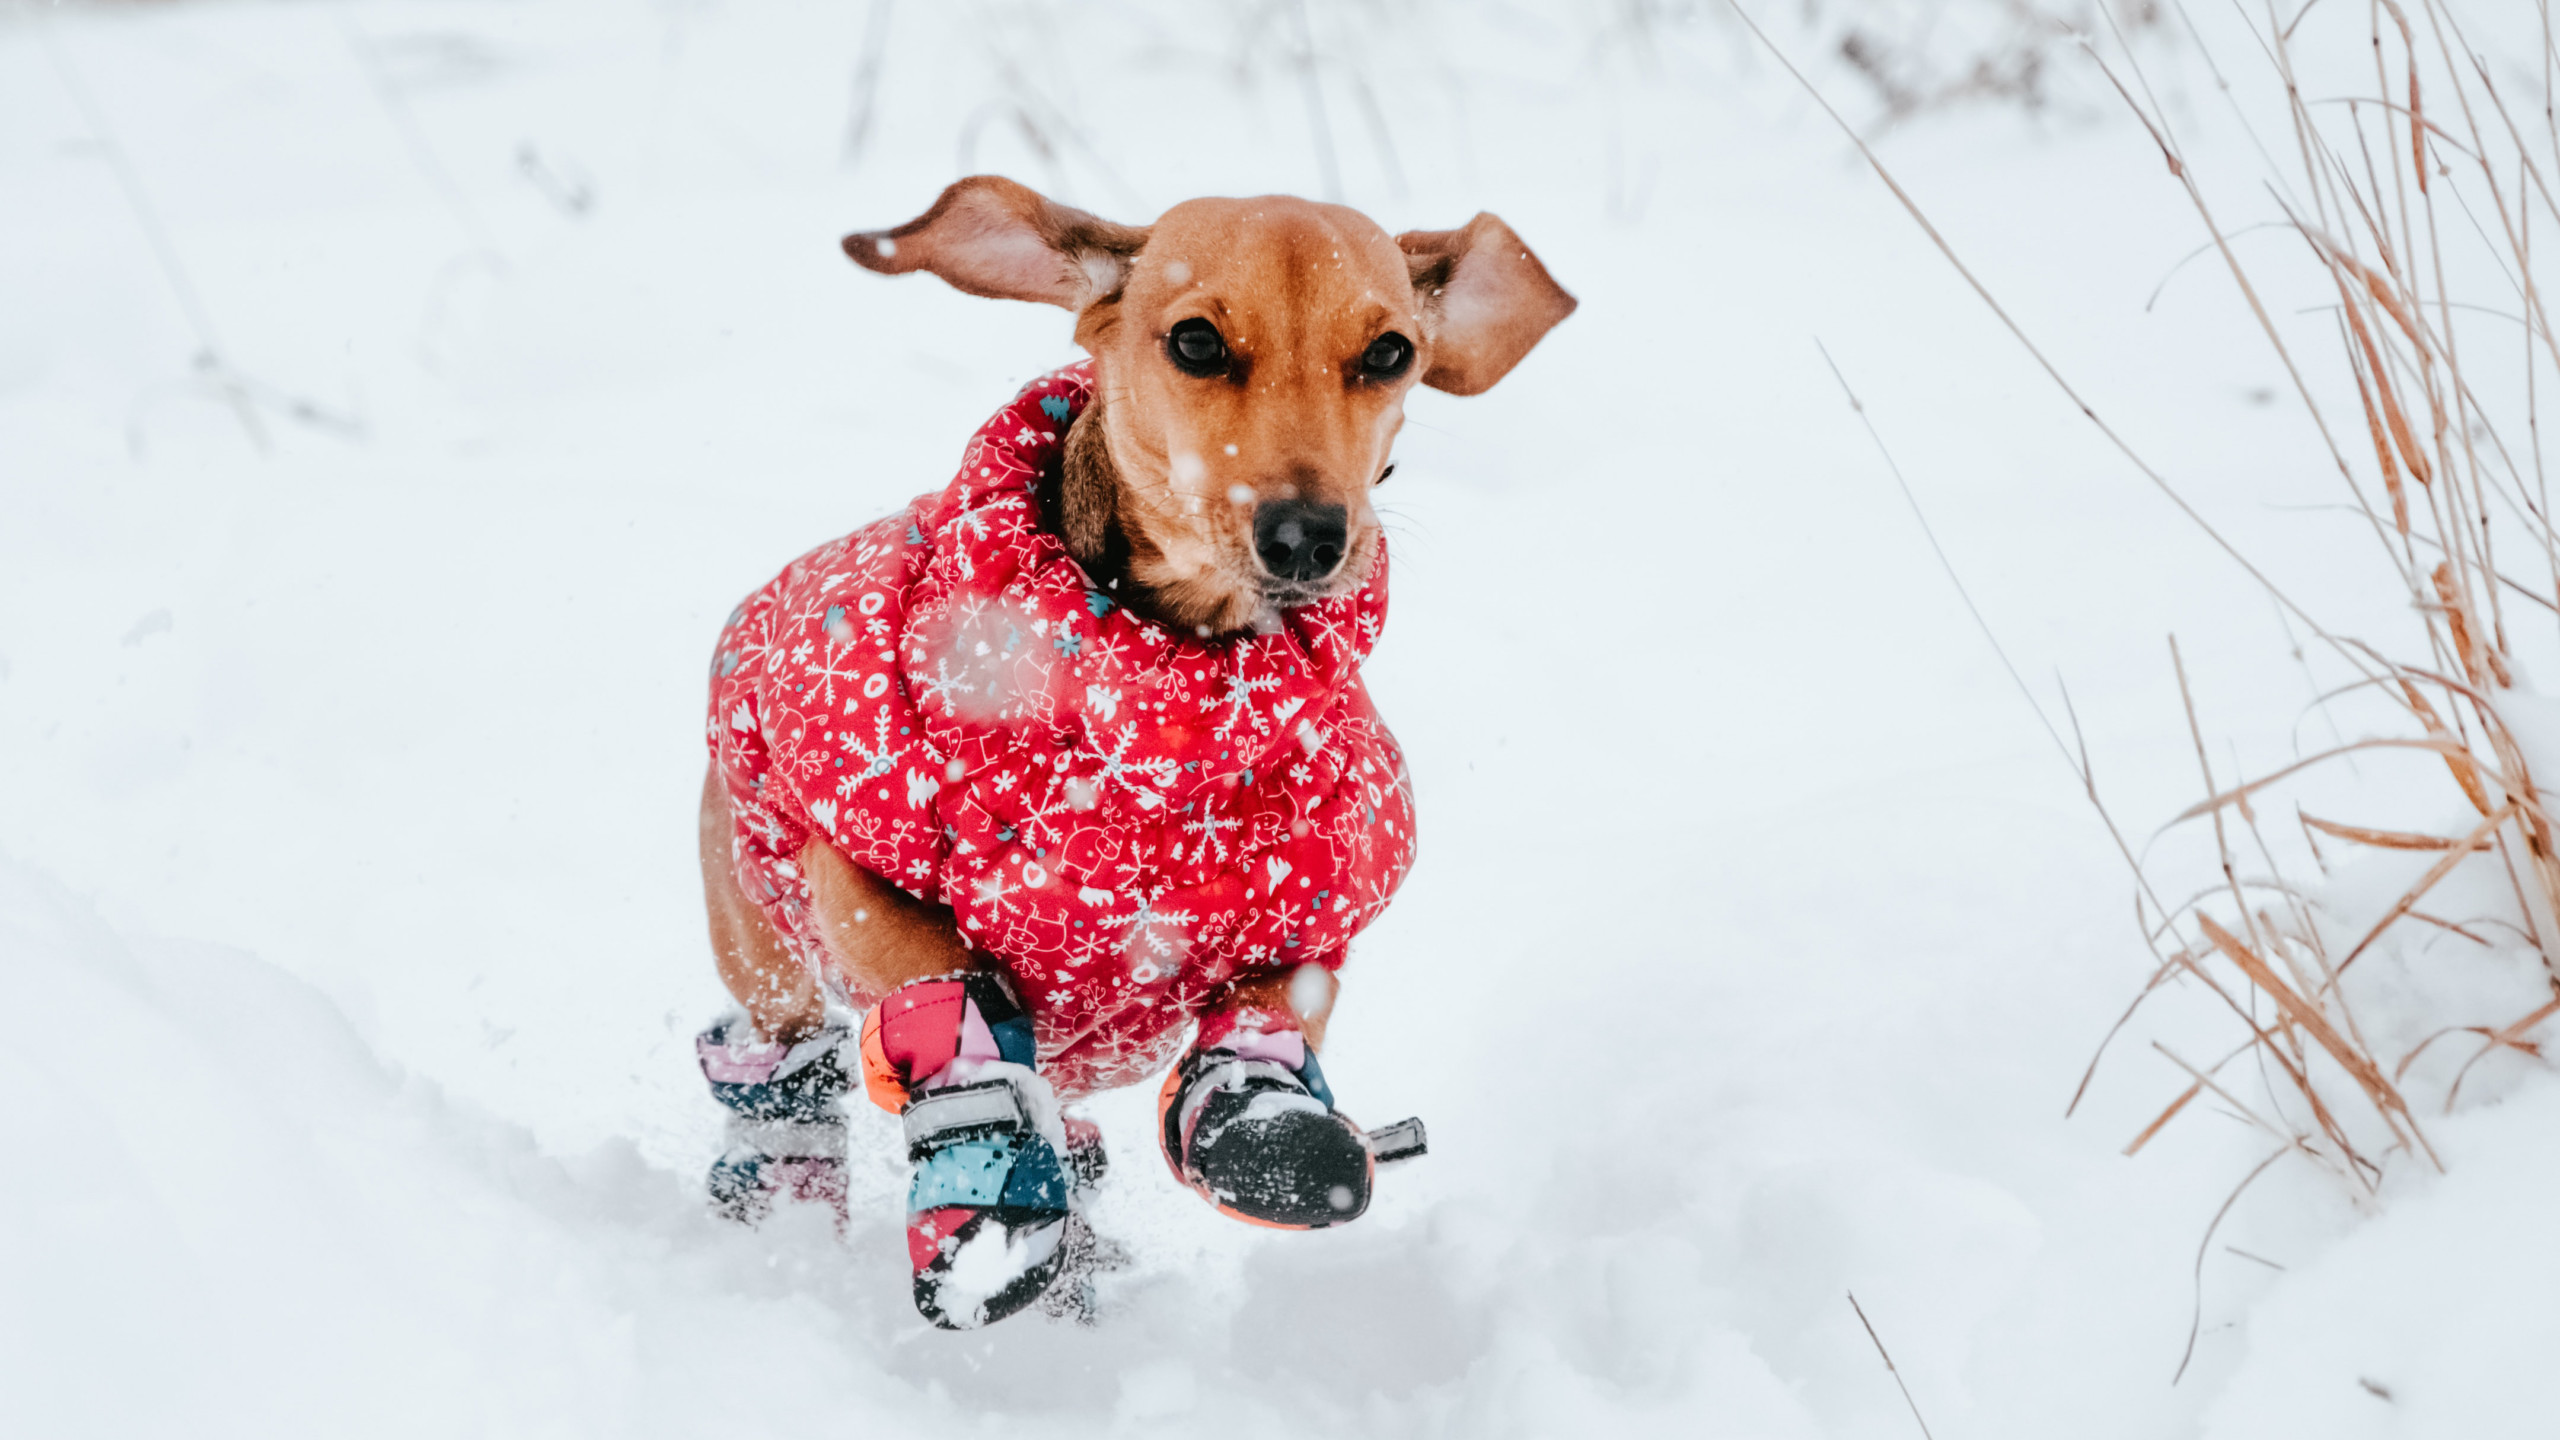 dachshund in snow wearing jacket and boots